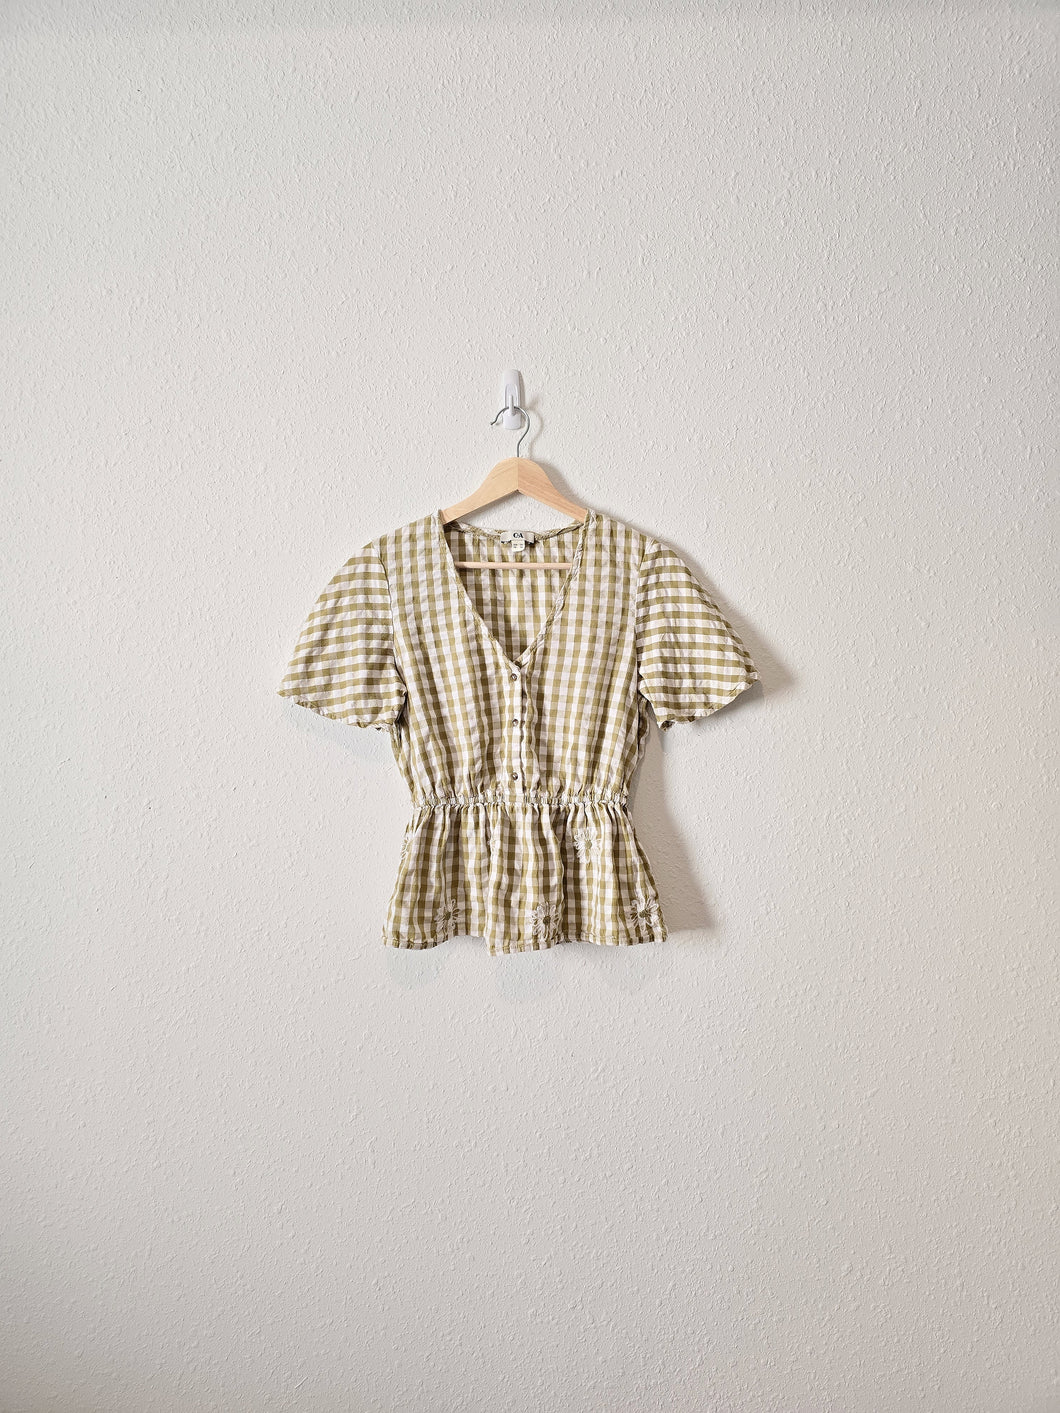 Floral Embroidered Gingham Top (XS/S)